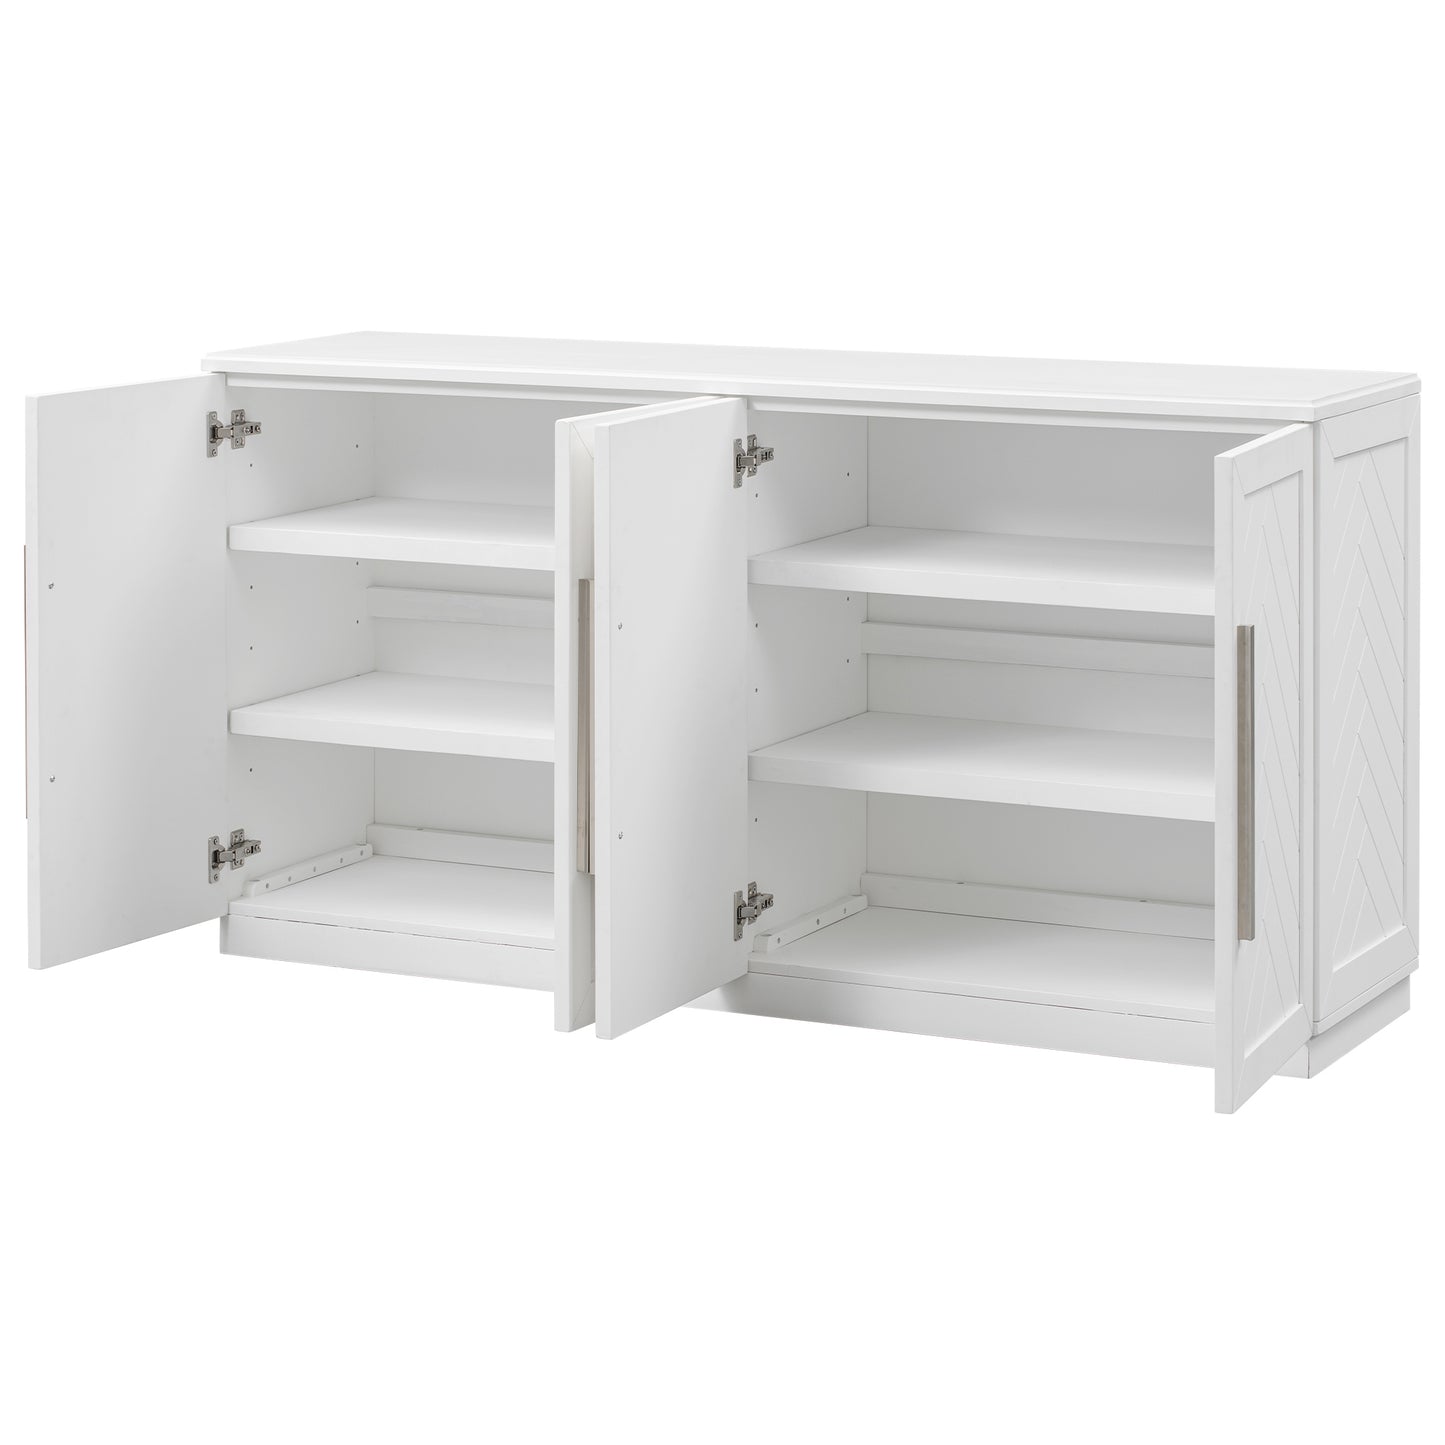 TREXM Sideboard with 4 Doors Large Storage Space Buffet Cabinet with Adjustable Shelves and Silver Handles for Kitchen, Dining Room, Living Room (White)